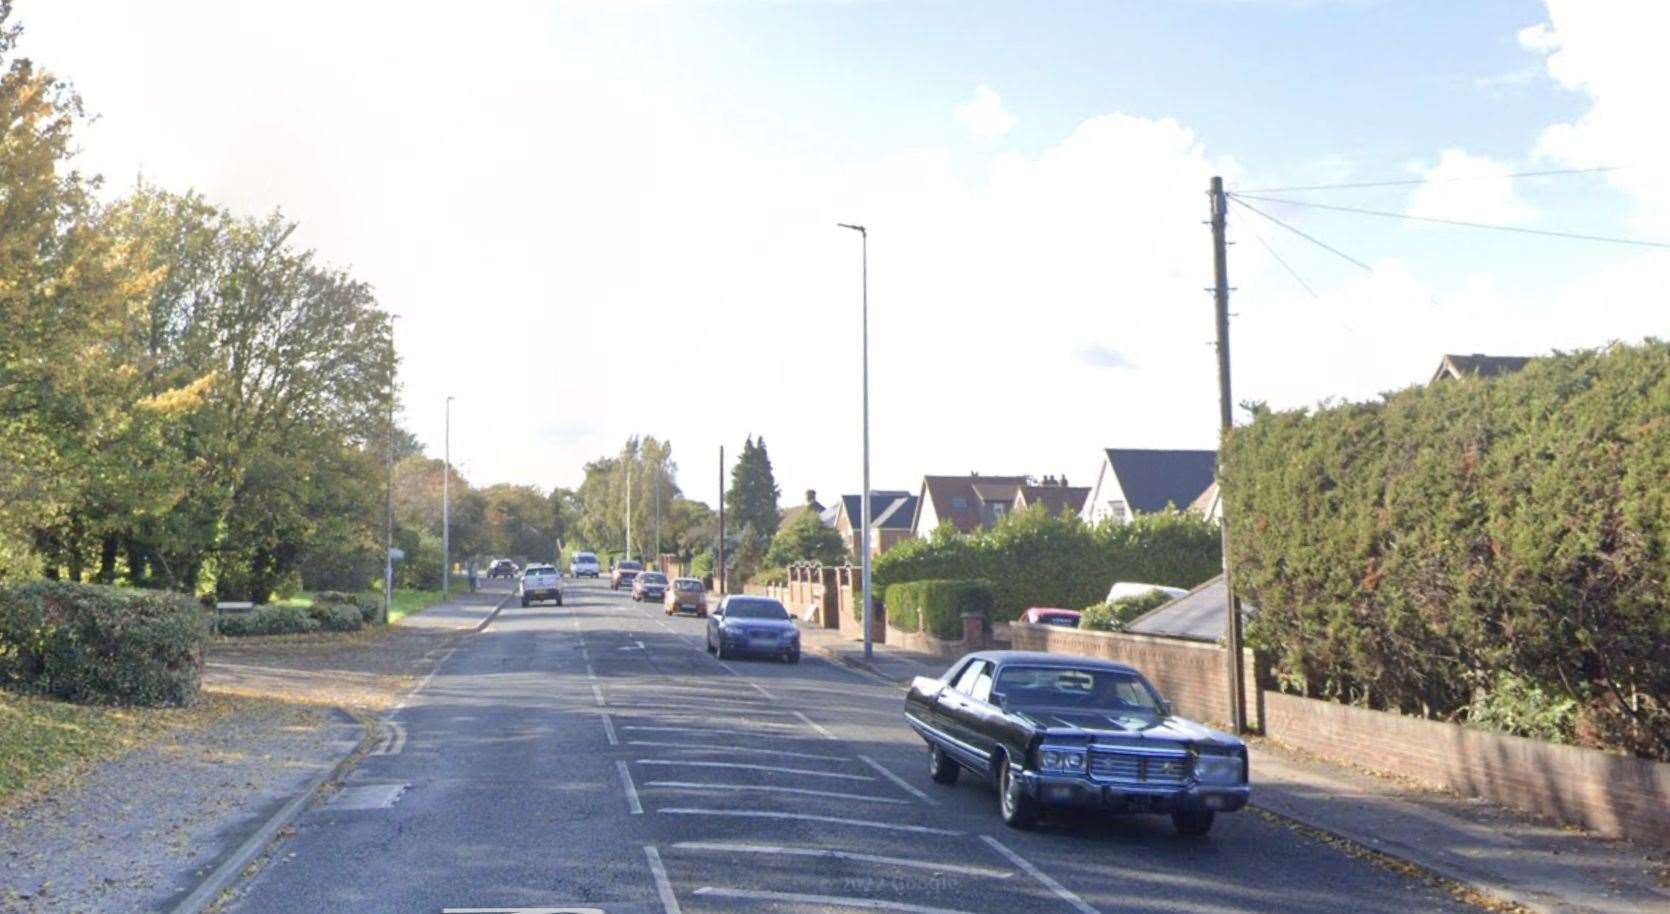 There is an ongoing police incident on A230 Horsted Way in Chatham. Picture: Google Maps